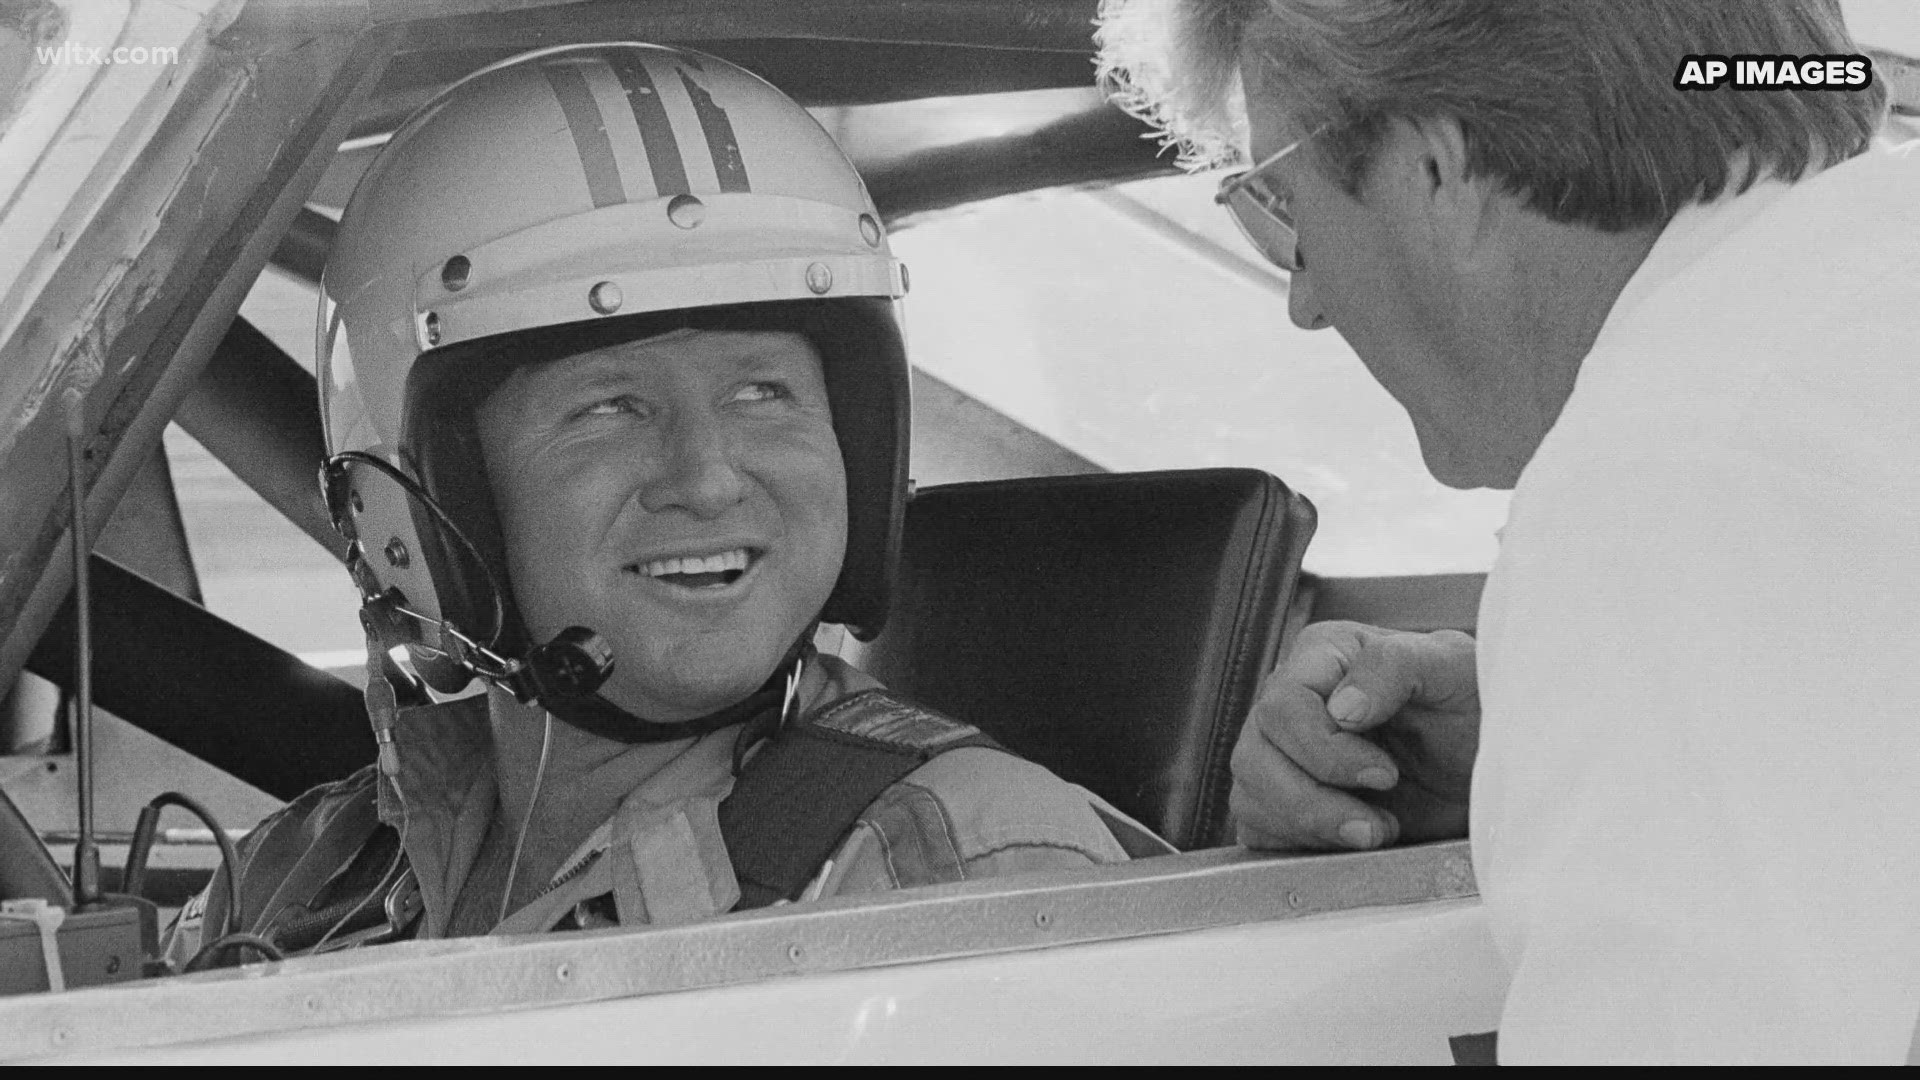 NASCAR Hall of Famer Cale Yarborough has taken his final laps. The Timmonsville native has died at the age of 84.